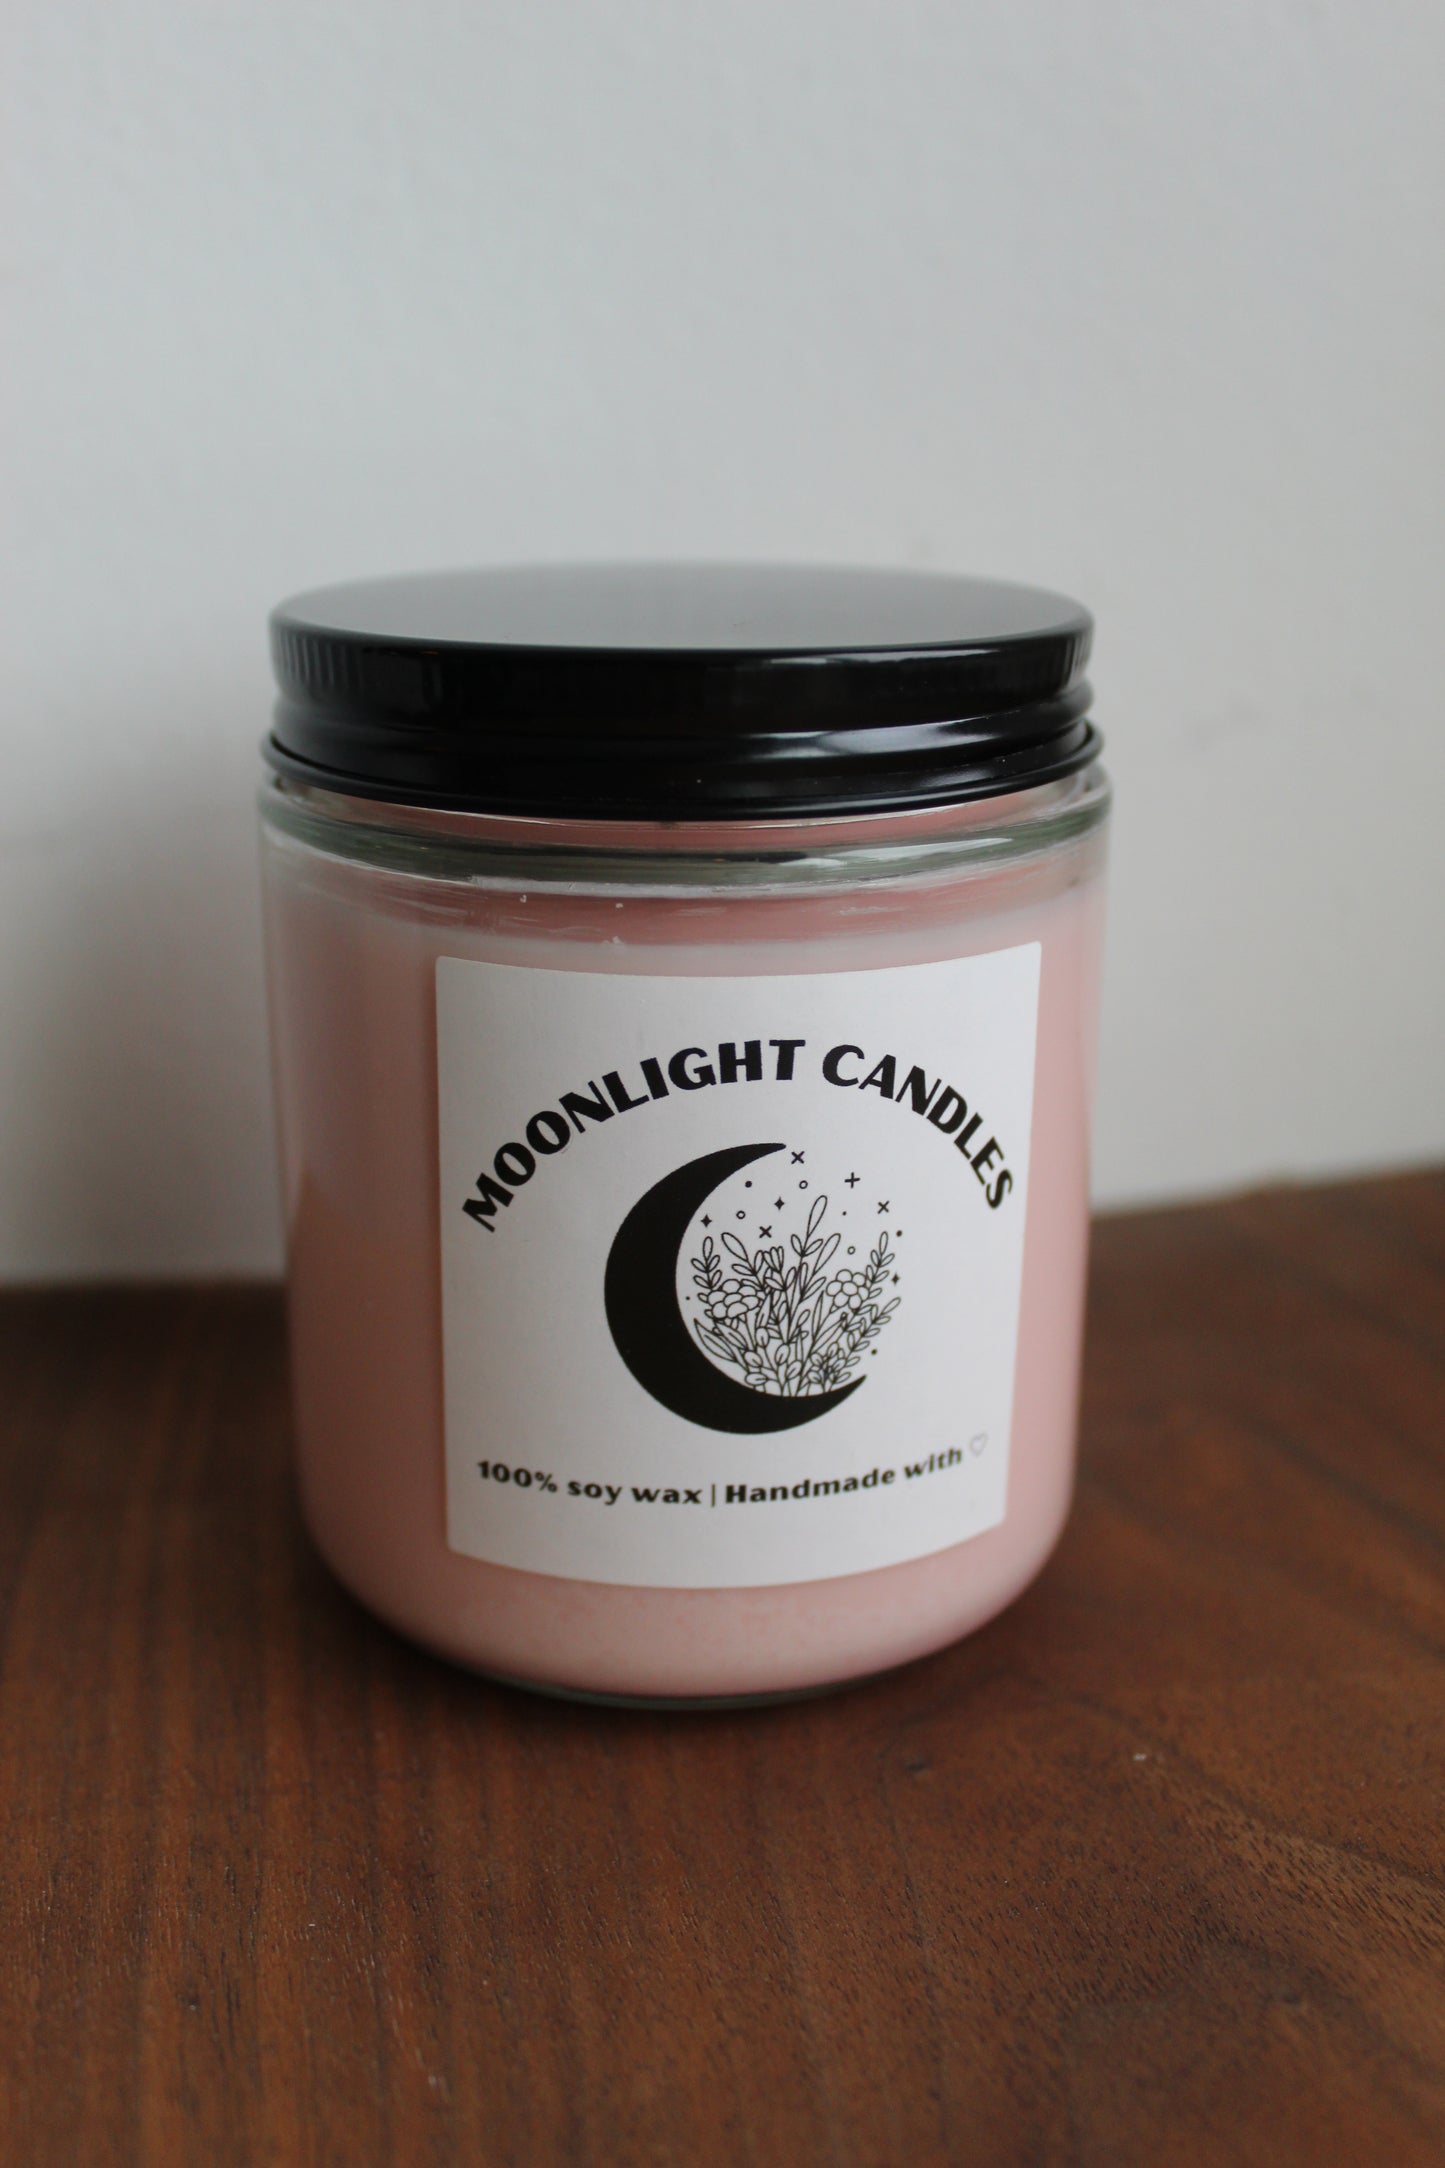 Candles by Moonlight Candles - 8 oz